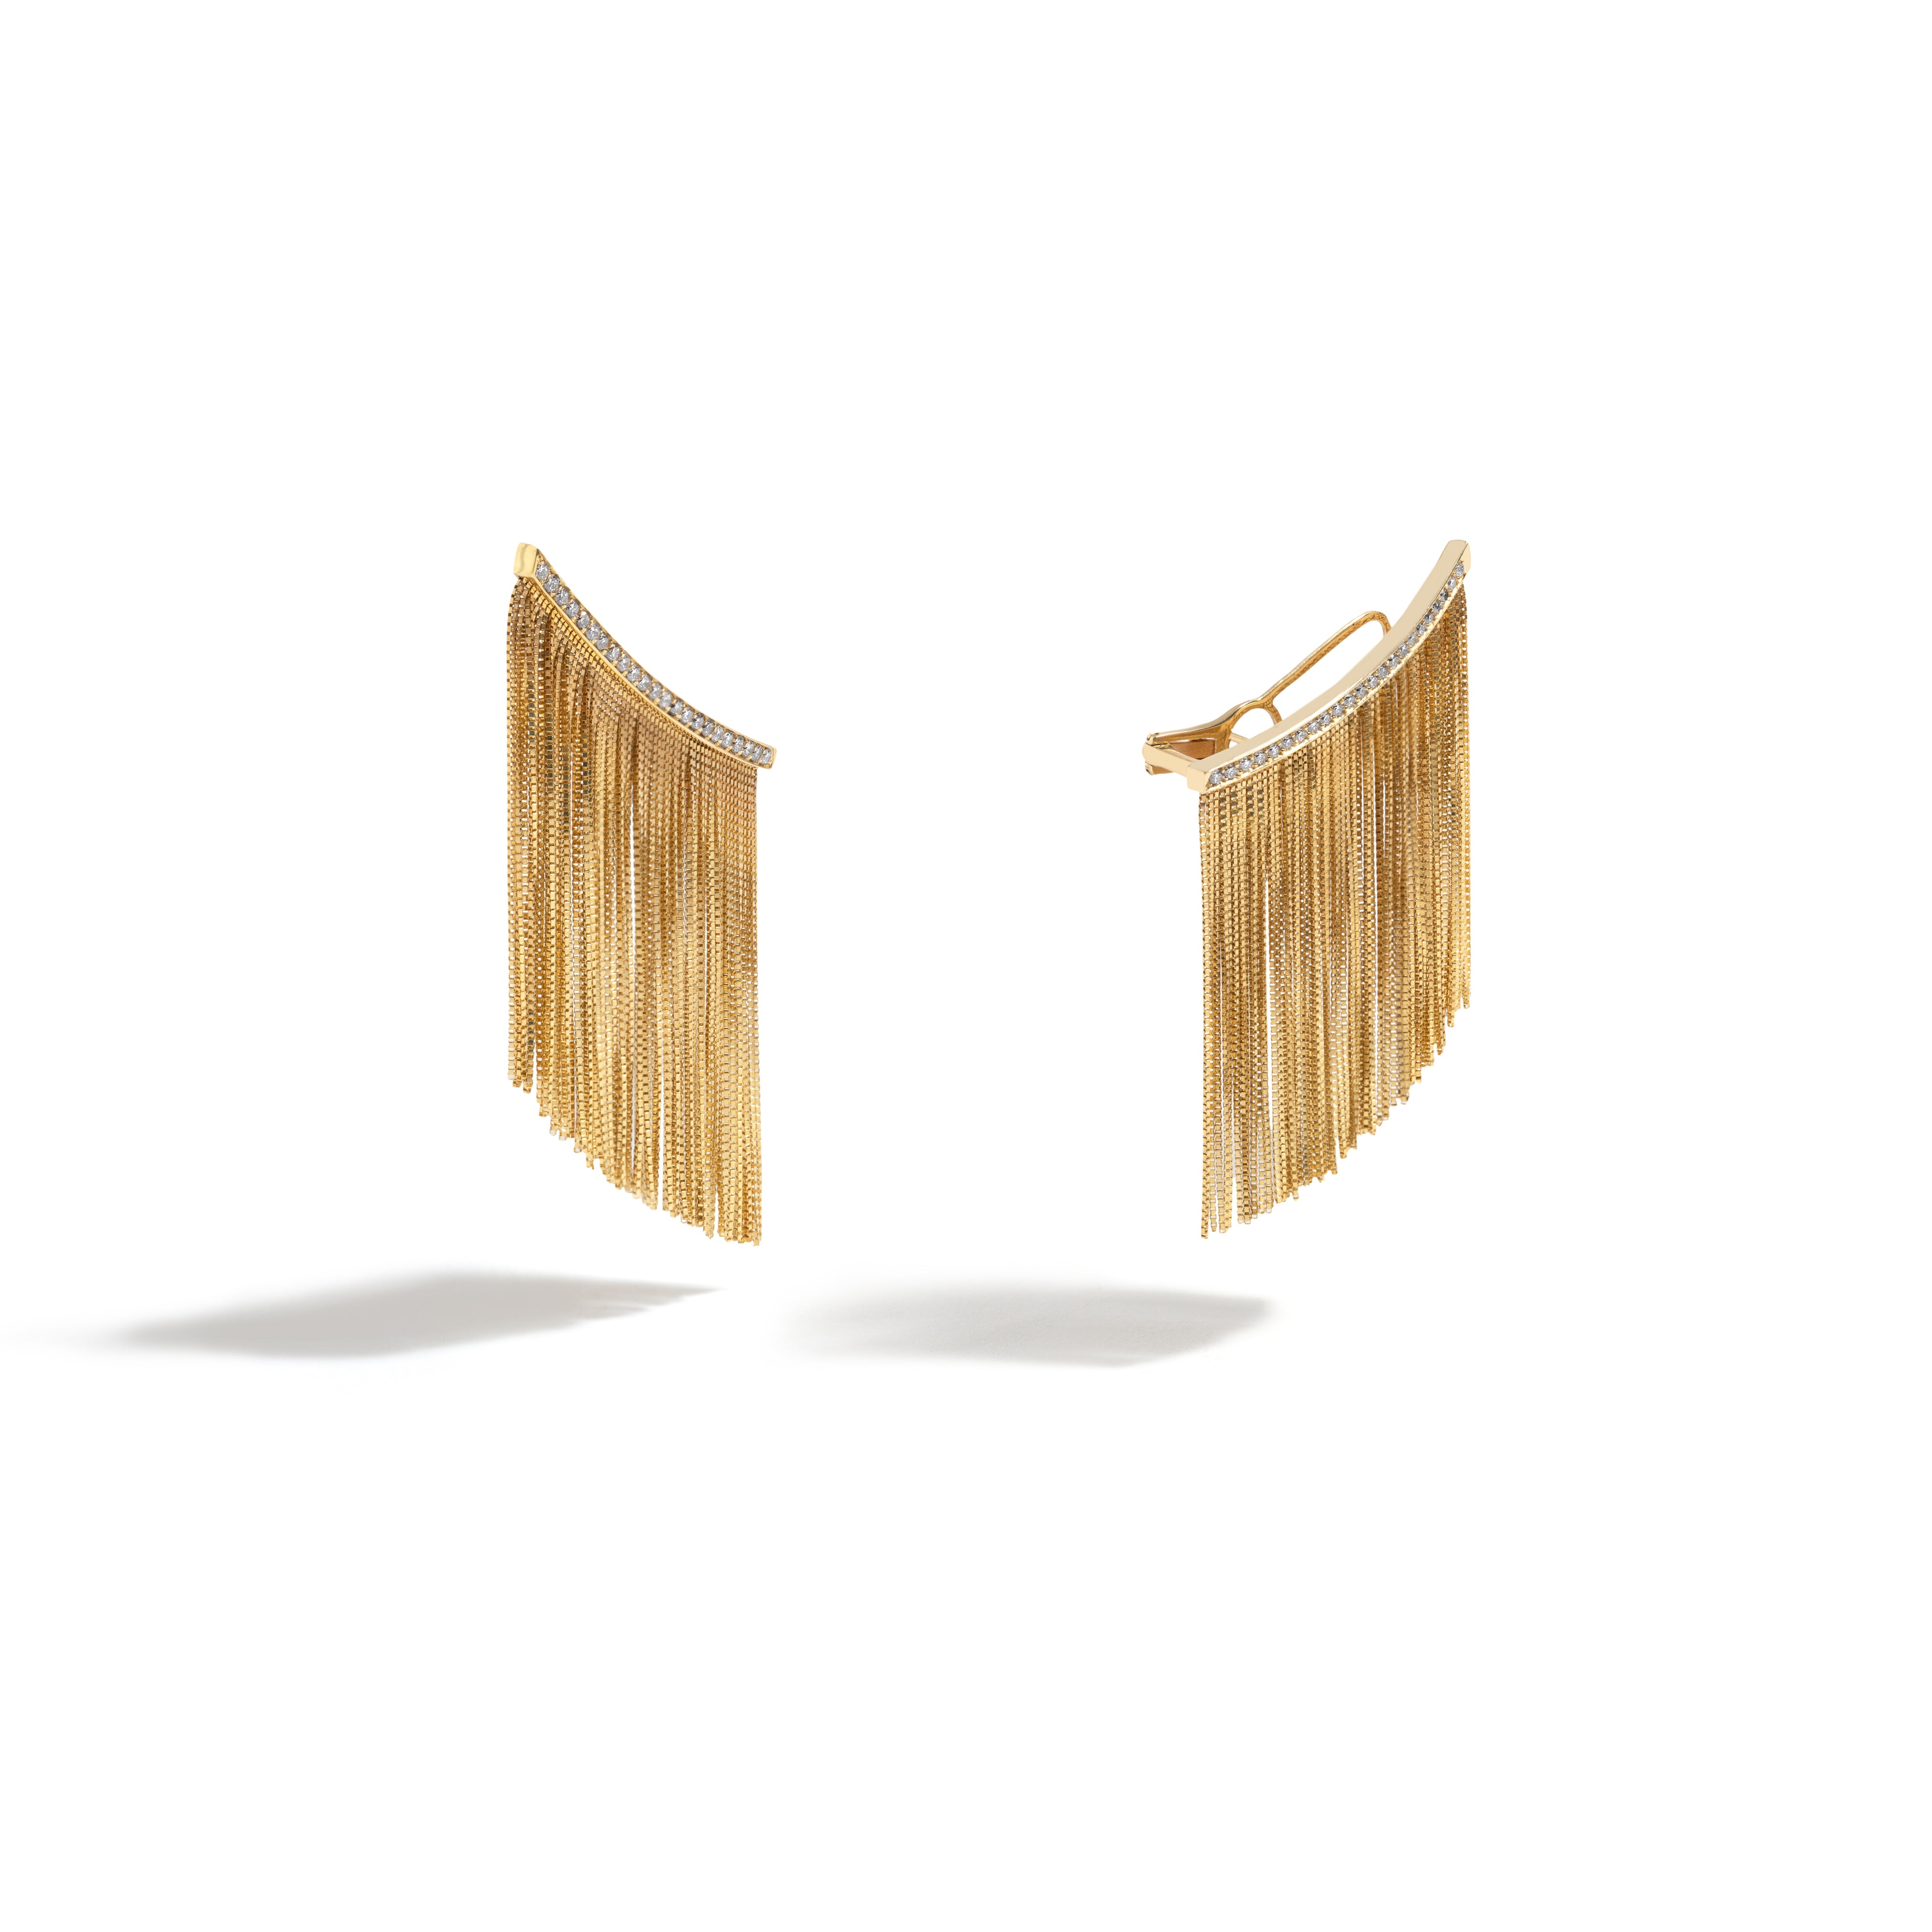 NEW VINTAGE POWER FRINGE EARRING IN 18K YELLOW GOLD WITH DIAMOND